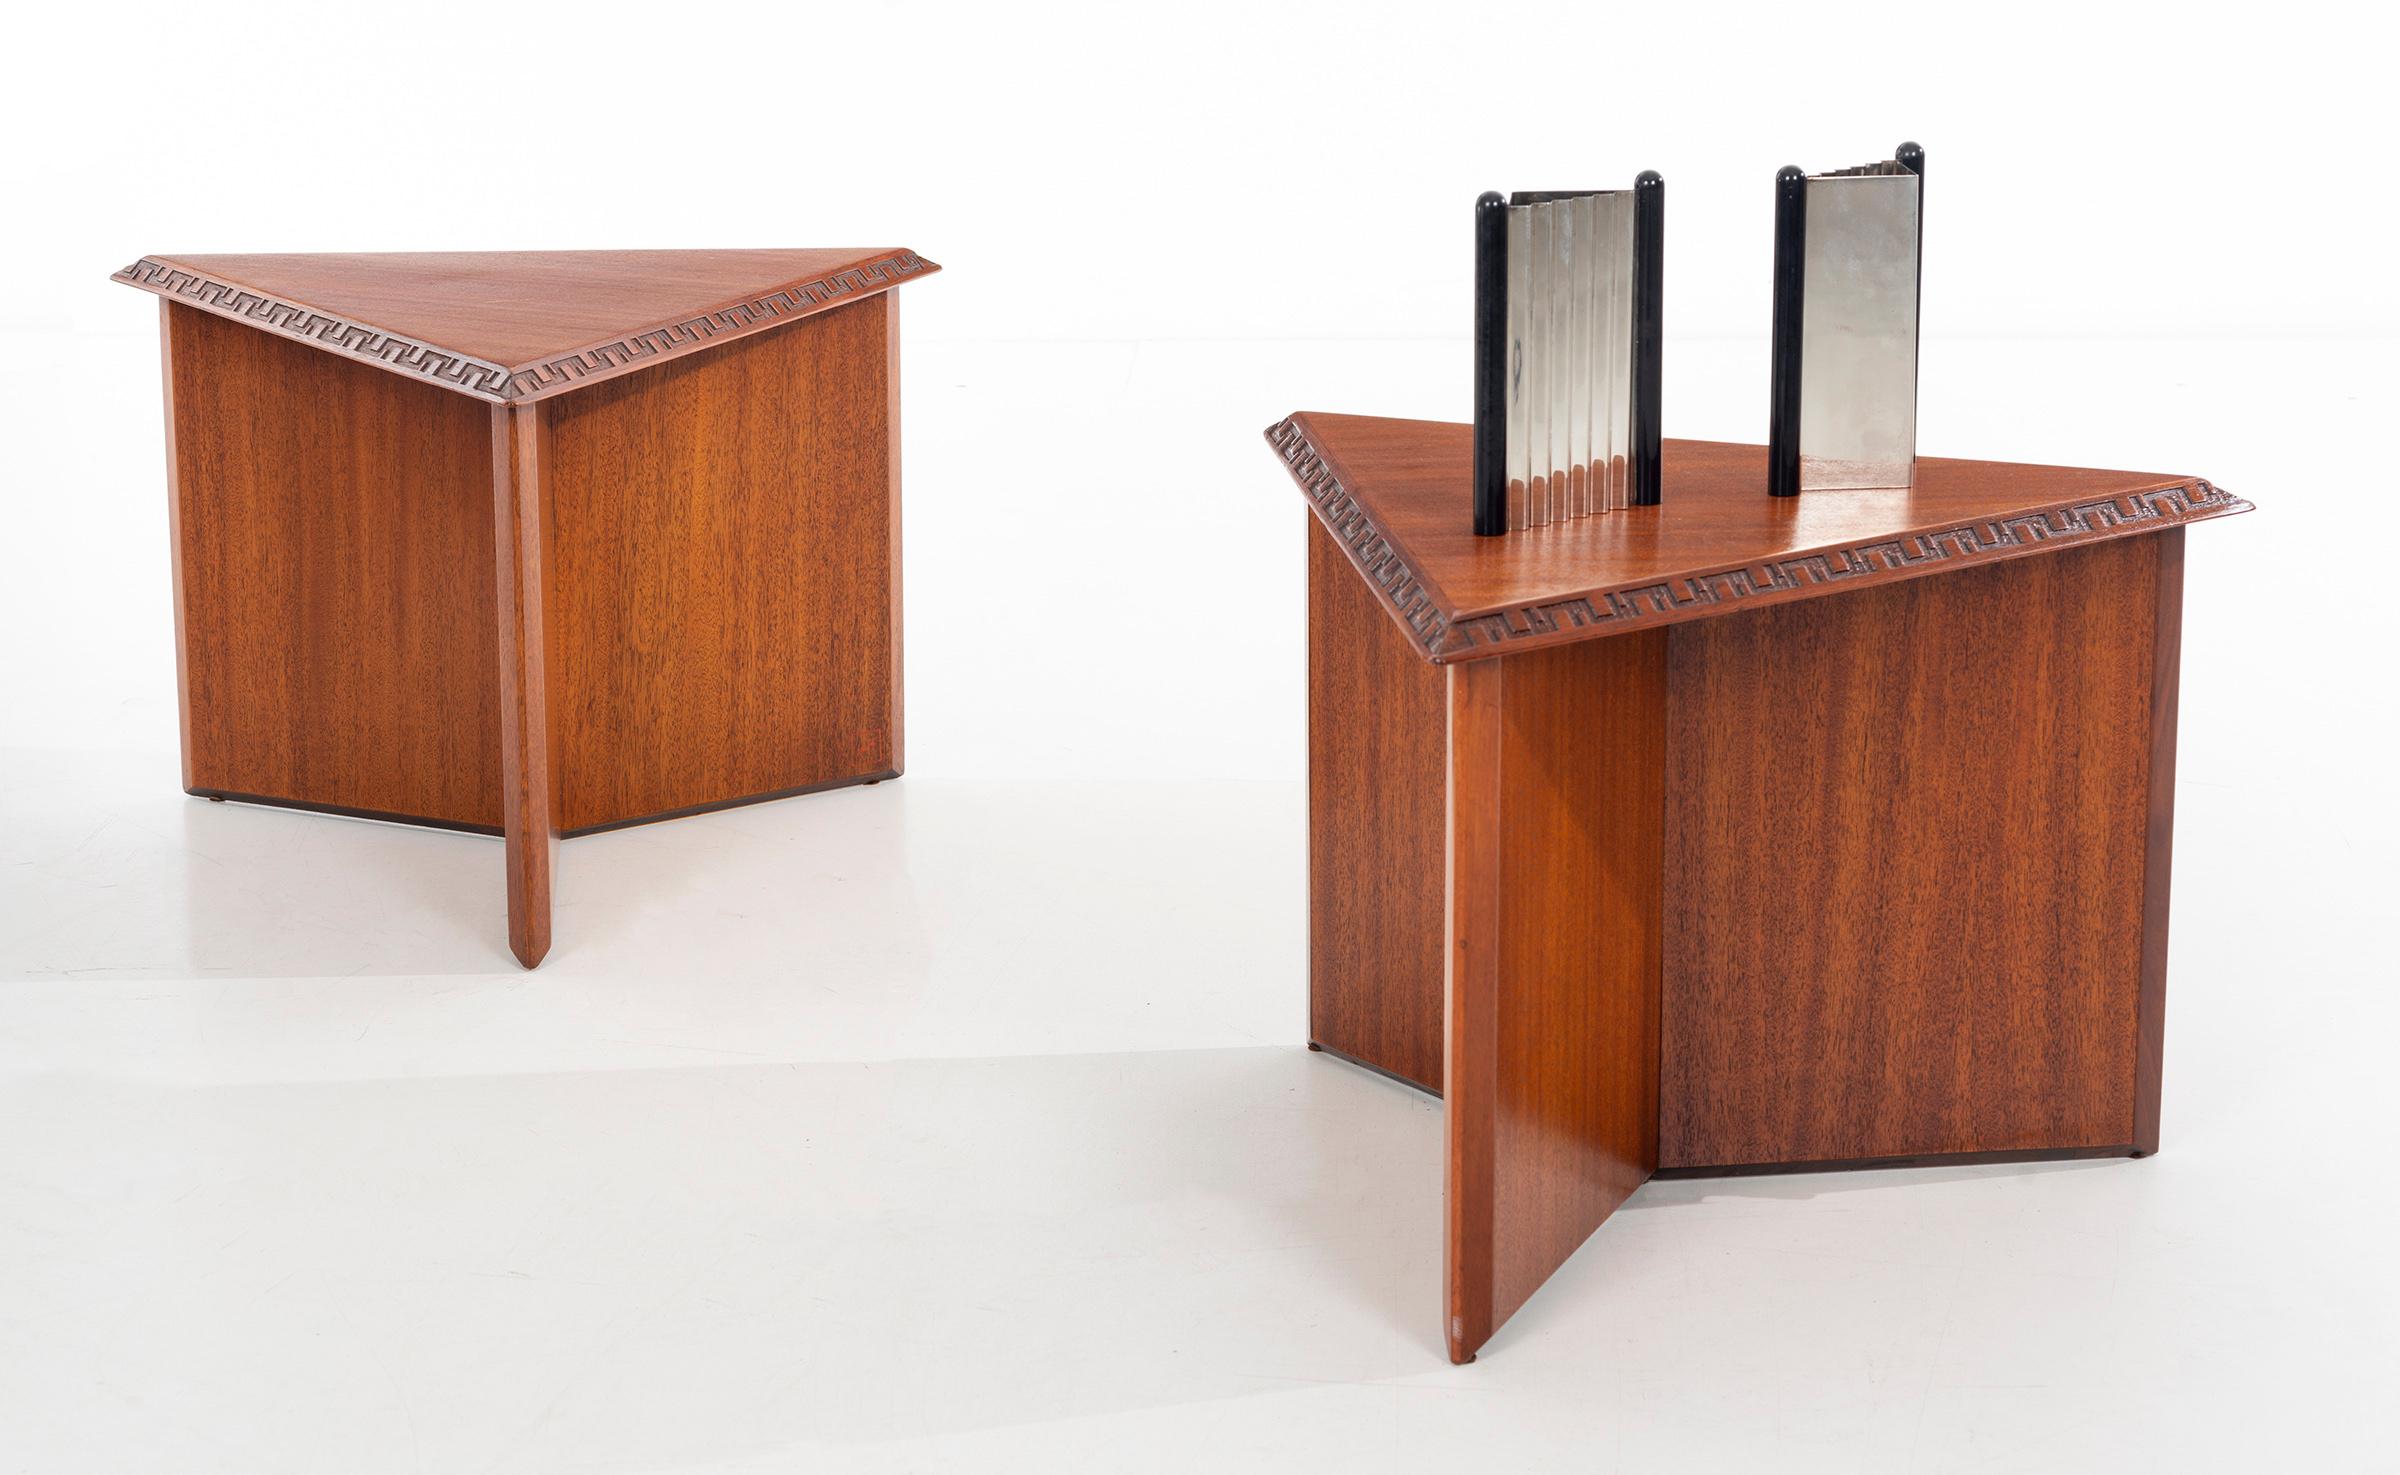 A pair of striking, architectural tables/stools designed by Frank Lloyd Wright for Henredon in 1955. The edges of the triangular tops are carved with Wright's famous Taliesen 